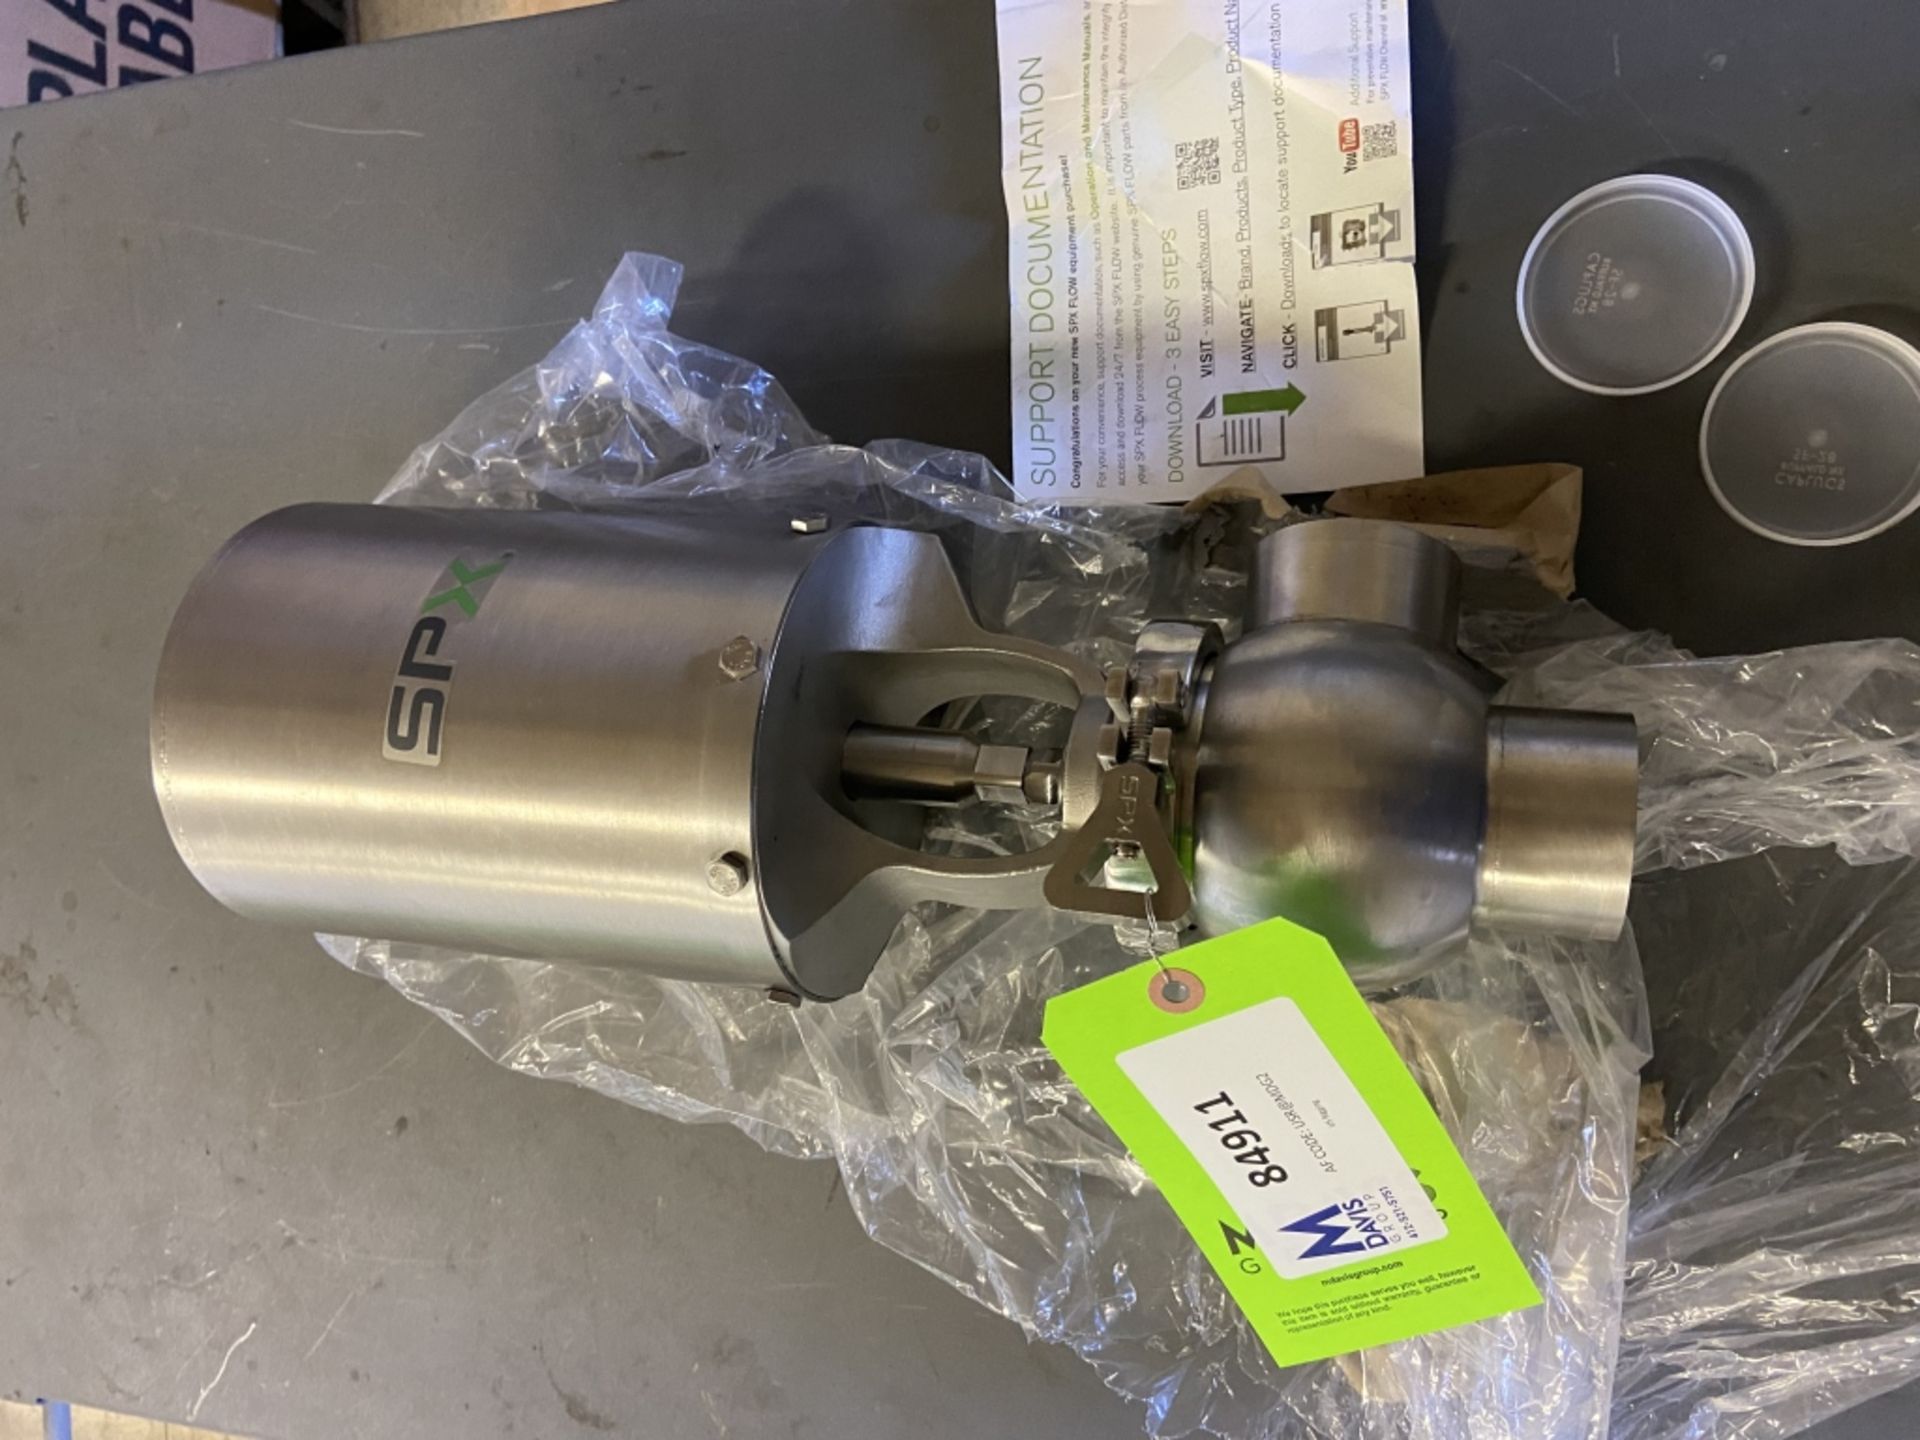 NEW SPX 2-1/2" S/S Air Valve, Weld Type (INV#84911)(Located @ the MDG Showroom 2.0 in Monroeville, - Image 3 of 4